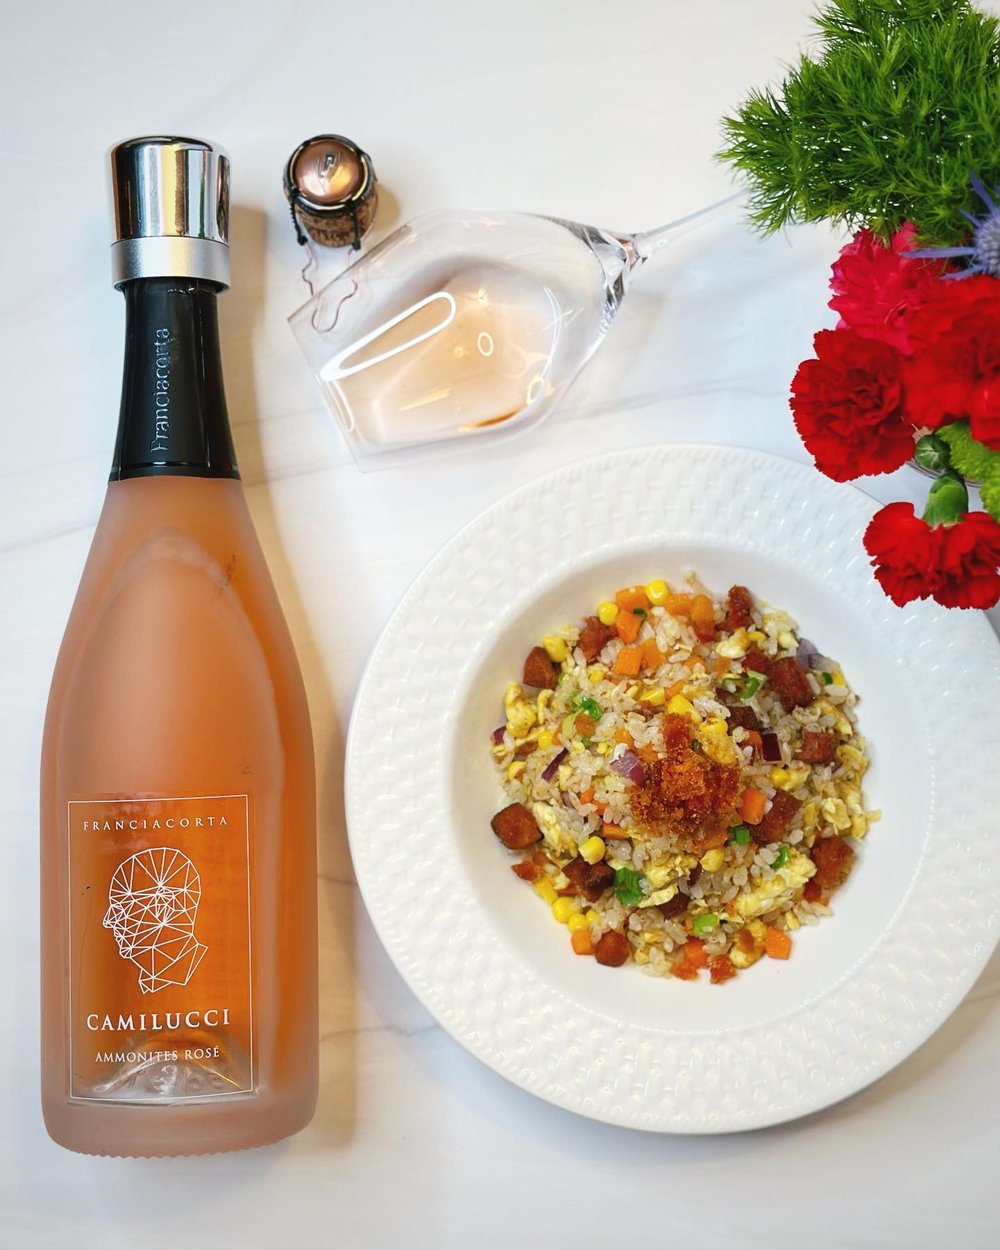 🥂🌷Franciacorta Ros&eacute; + Mullet Roe Fried Rice (烏魚子炒飯) 🥢🌾
&nbsp;
🎊Happy Sunday, my Instagram fam and friends!🪅
&nbsp;
Taking a quick trip back to Taiwan and visiting family and friends made me so happy; even though I wish I could stay longe